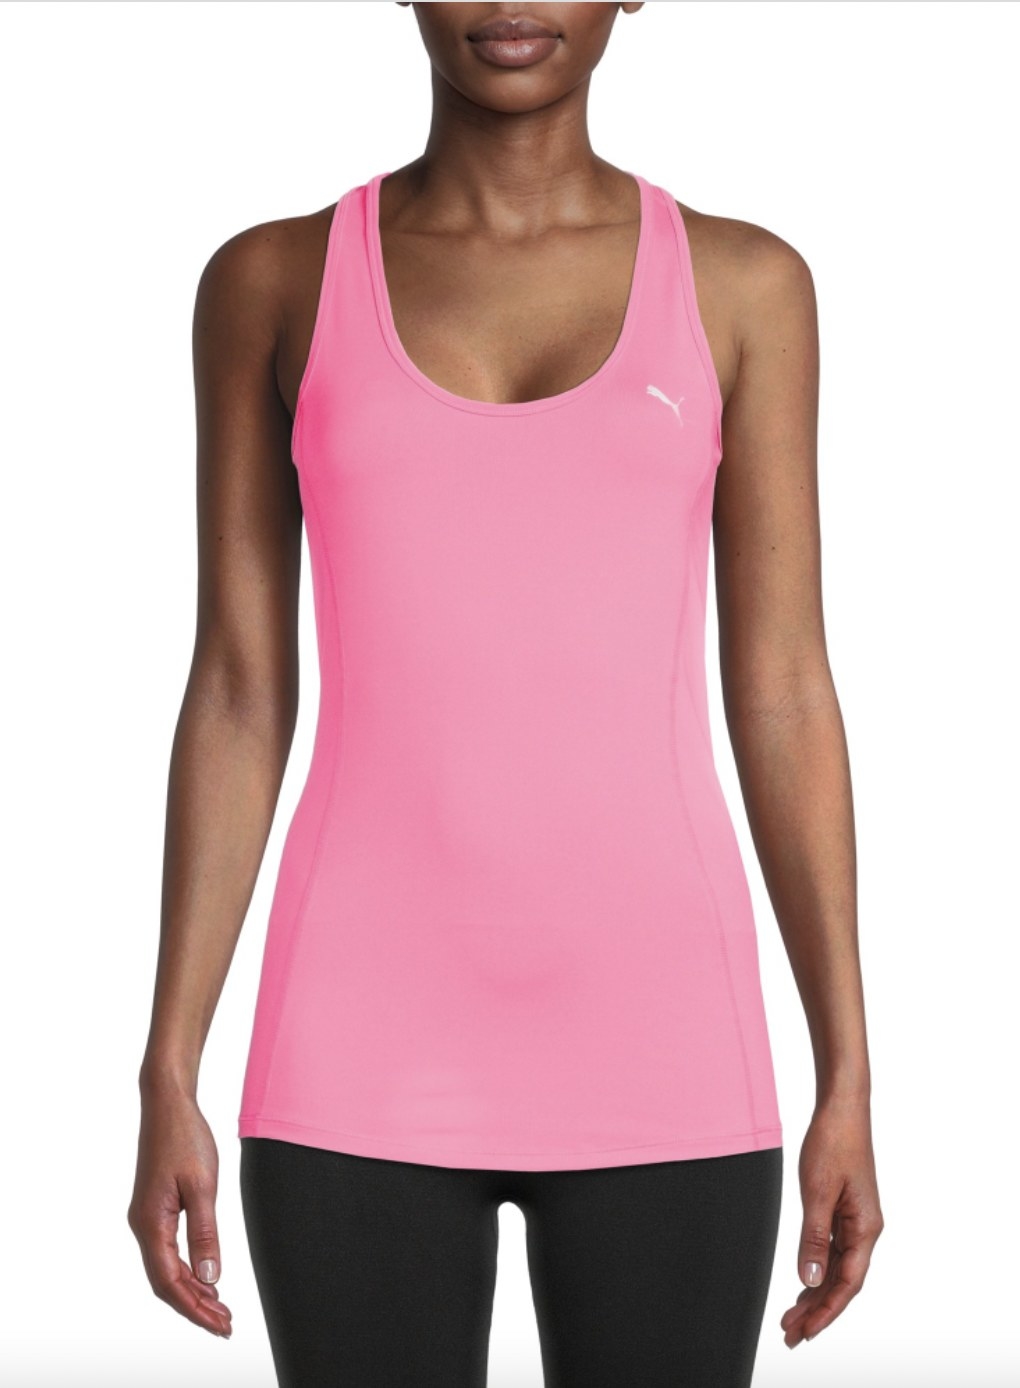 A person wearing a pink tank top with black leggings